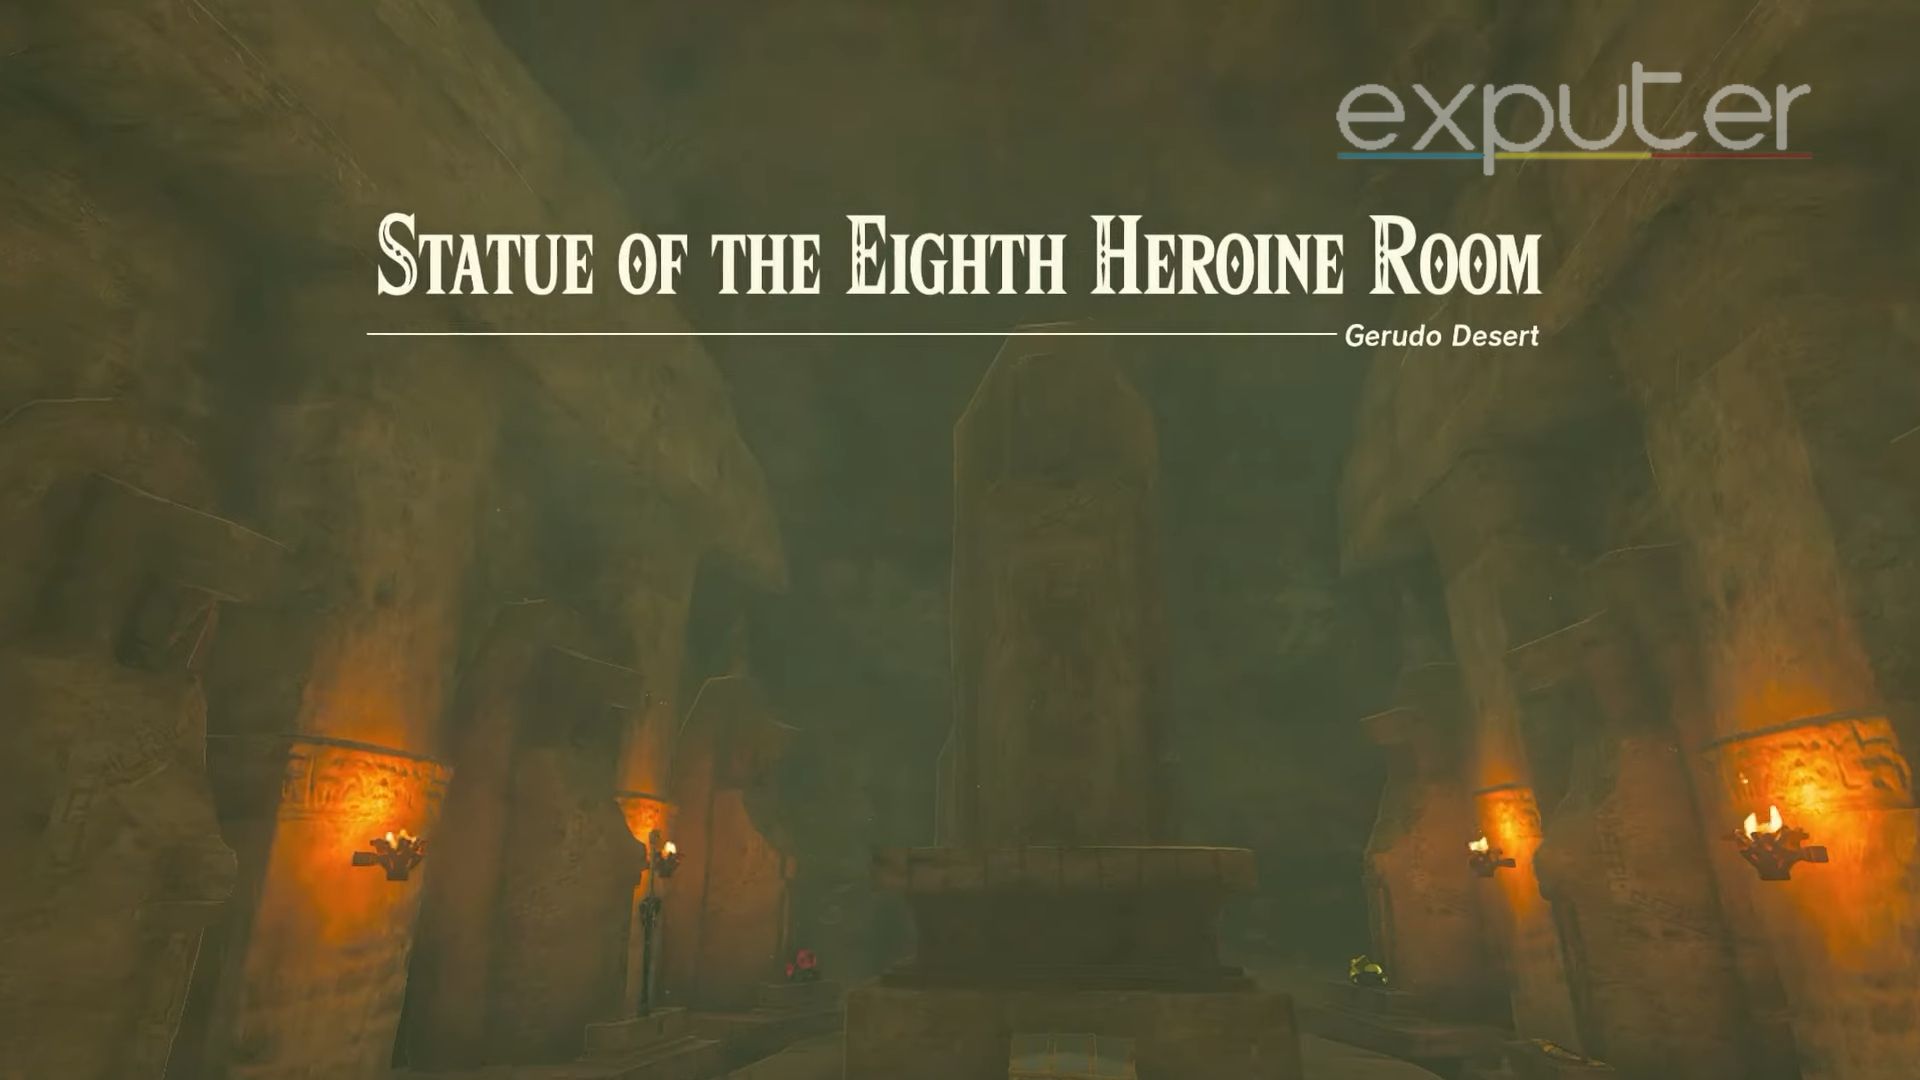 Statue of the Eighth Heroine Room